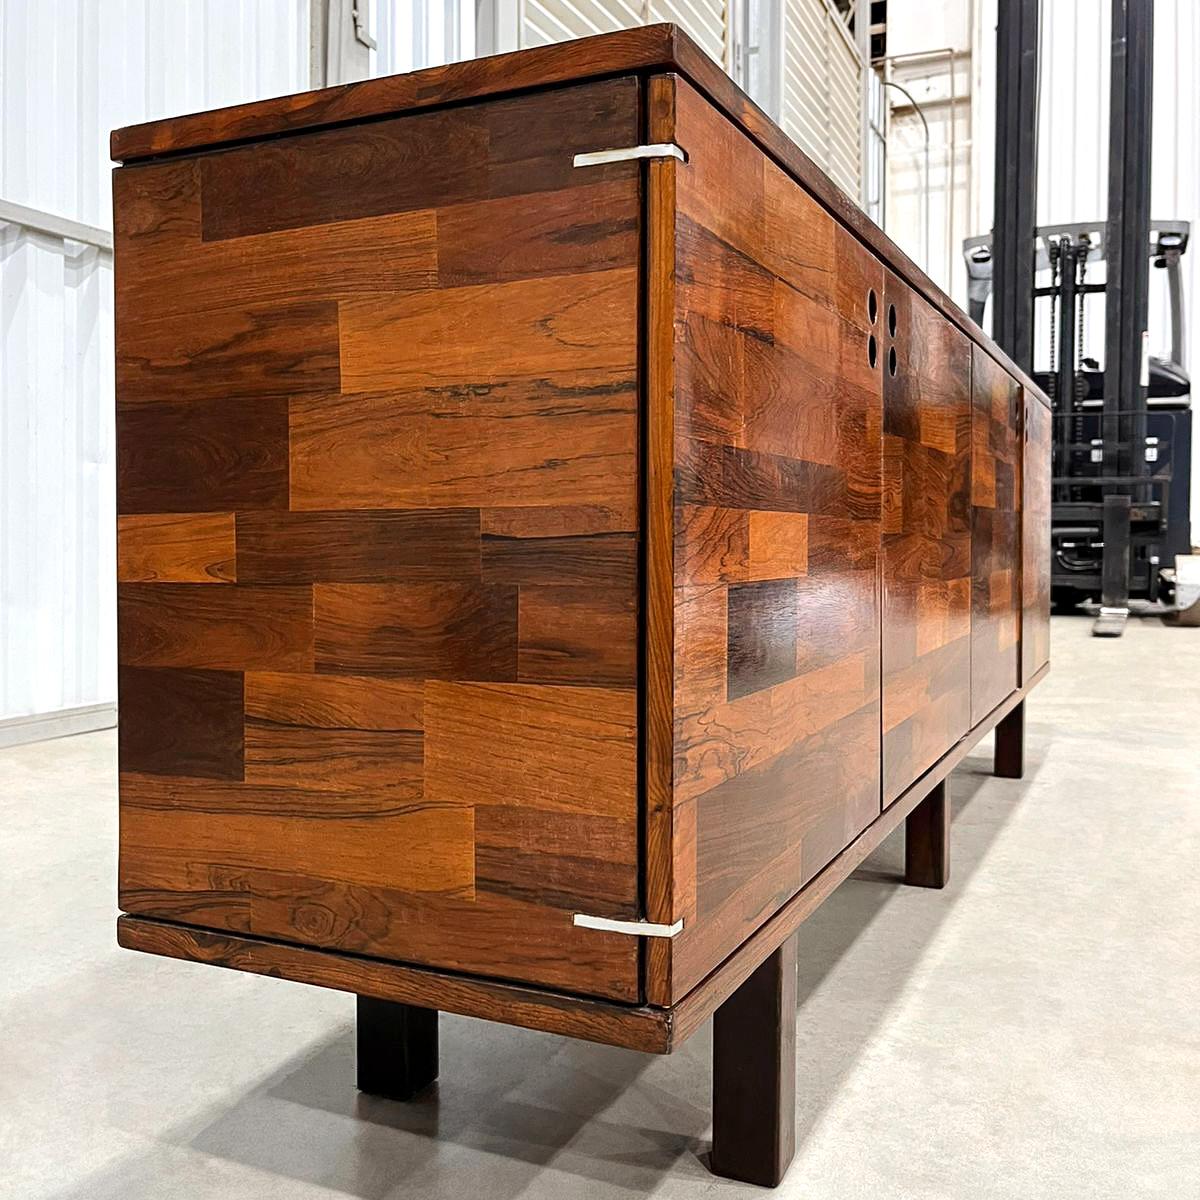 20th Century Credenza in Hardwood Patchwork style by Jorge Zalszupin, 1960’s For Sale